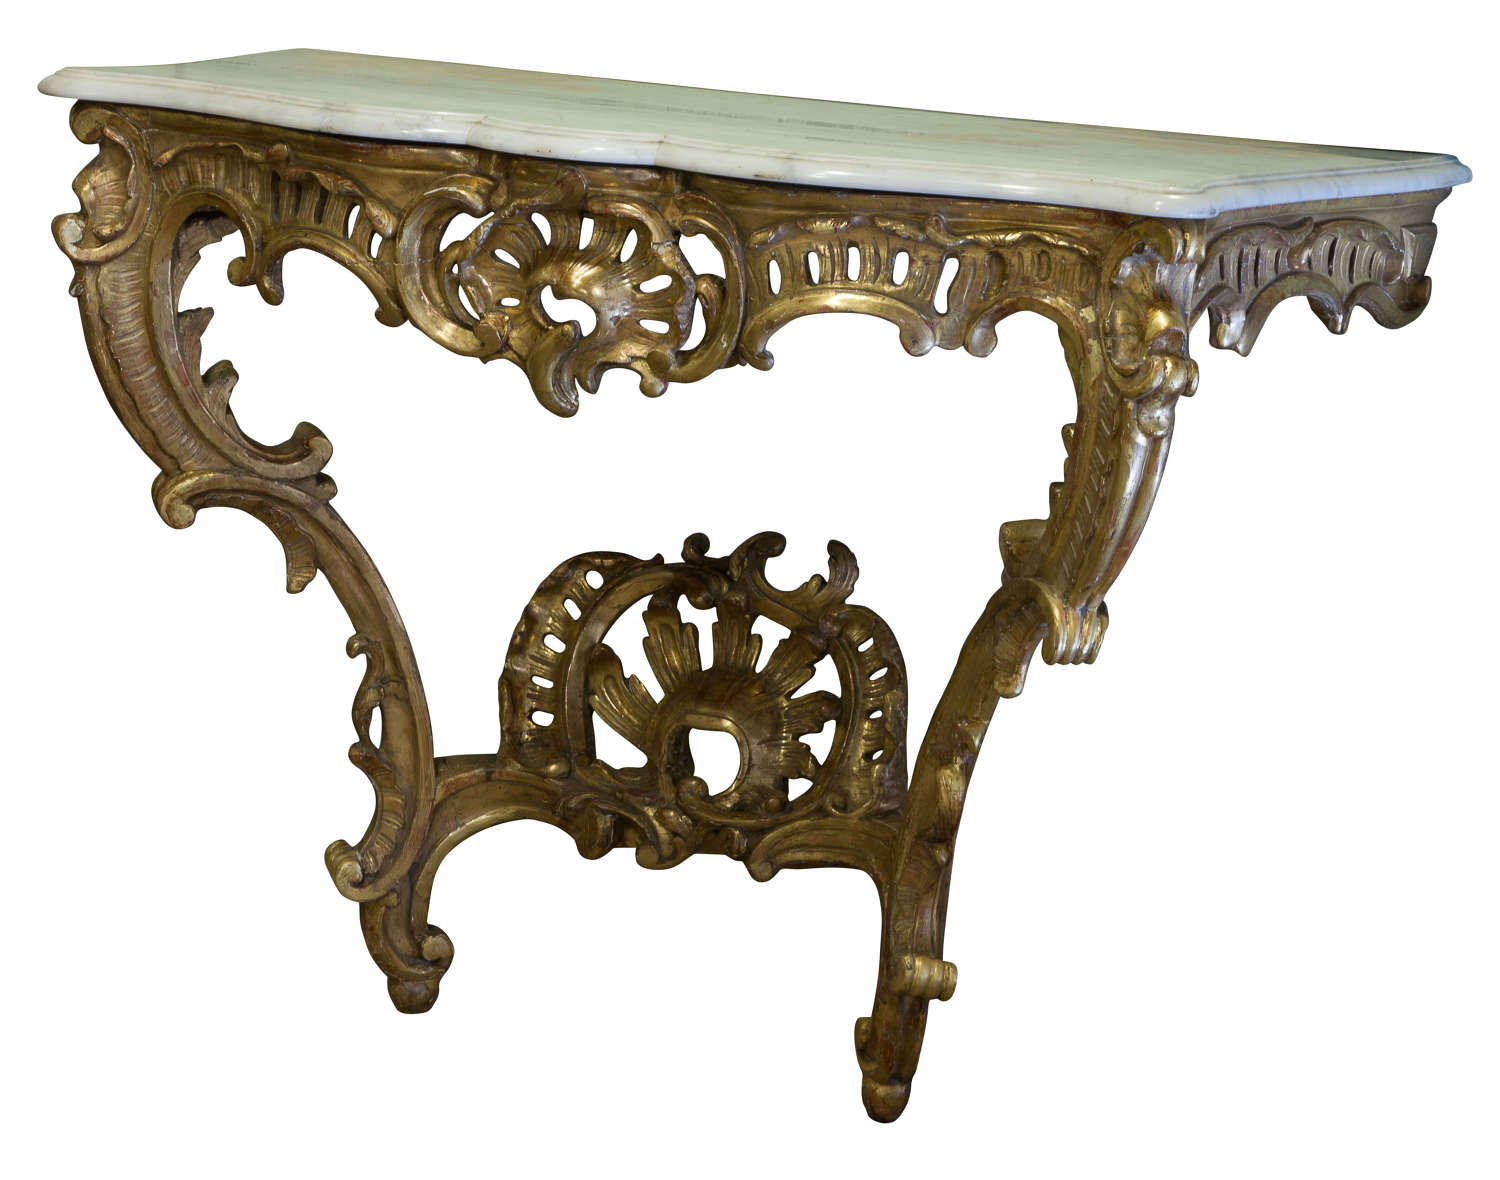 A gilded Louis XV style console table with marble top